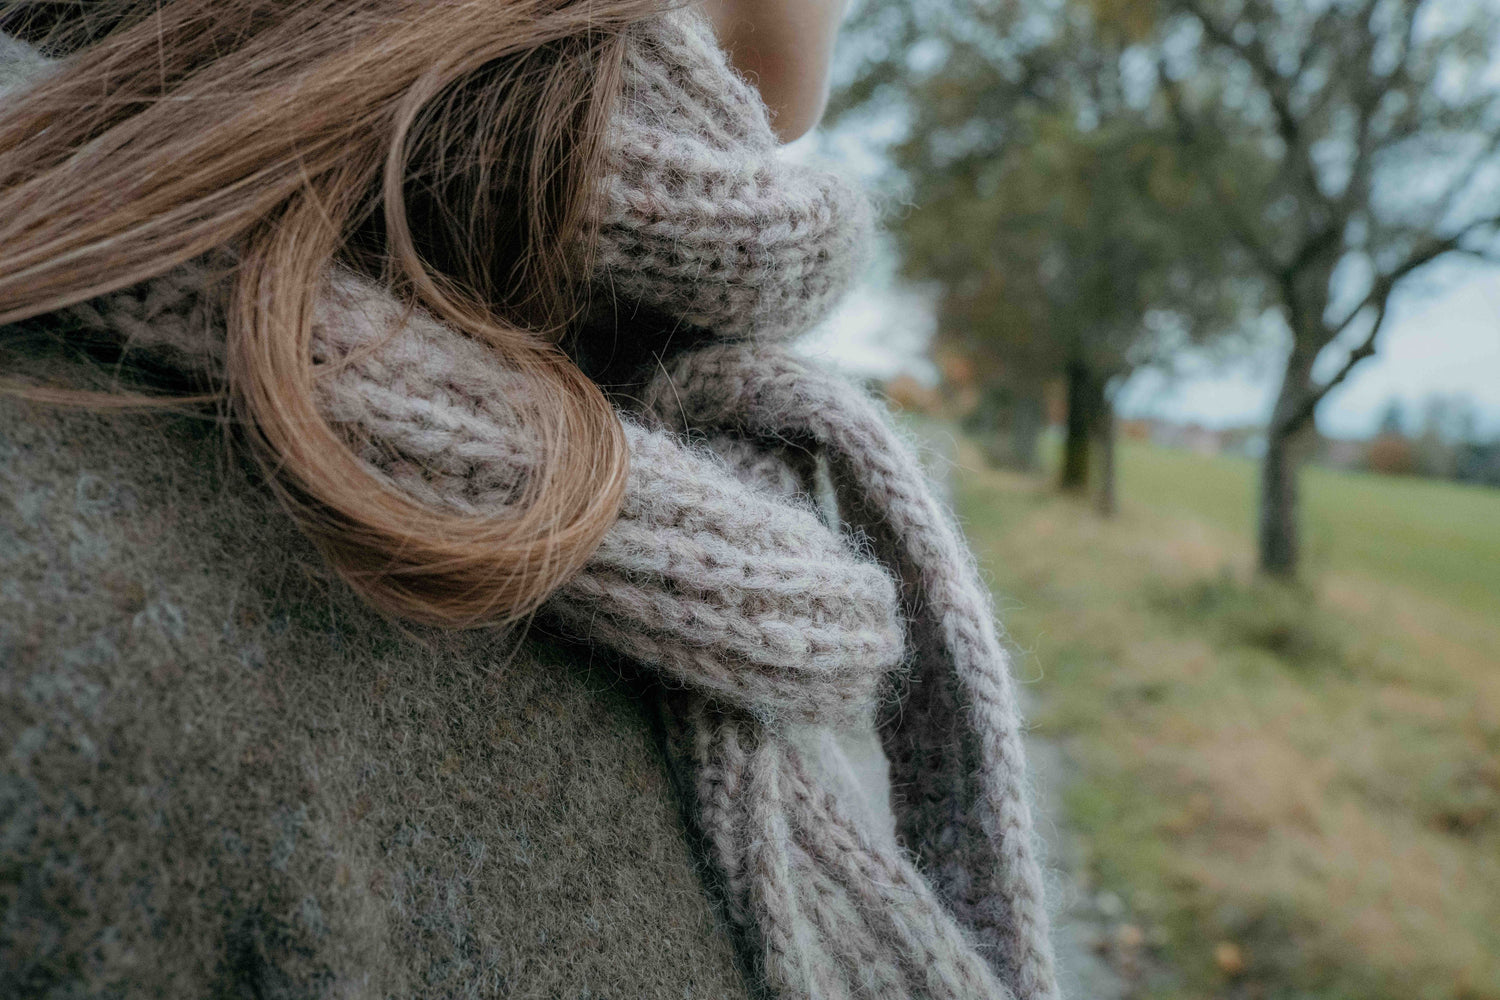 Designer Ulven wears the Season's End Shawl in a close-up that displays the half-brioche stitch and I-cord edges, knit with Höner och Eir's unspun Nutiden yarn, against a blurred autumn backdrop.